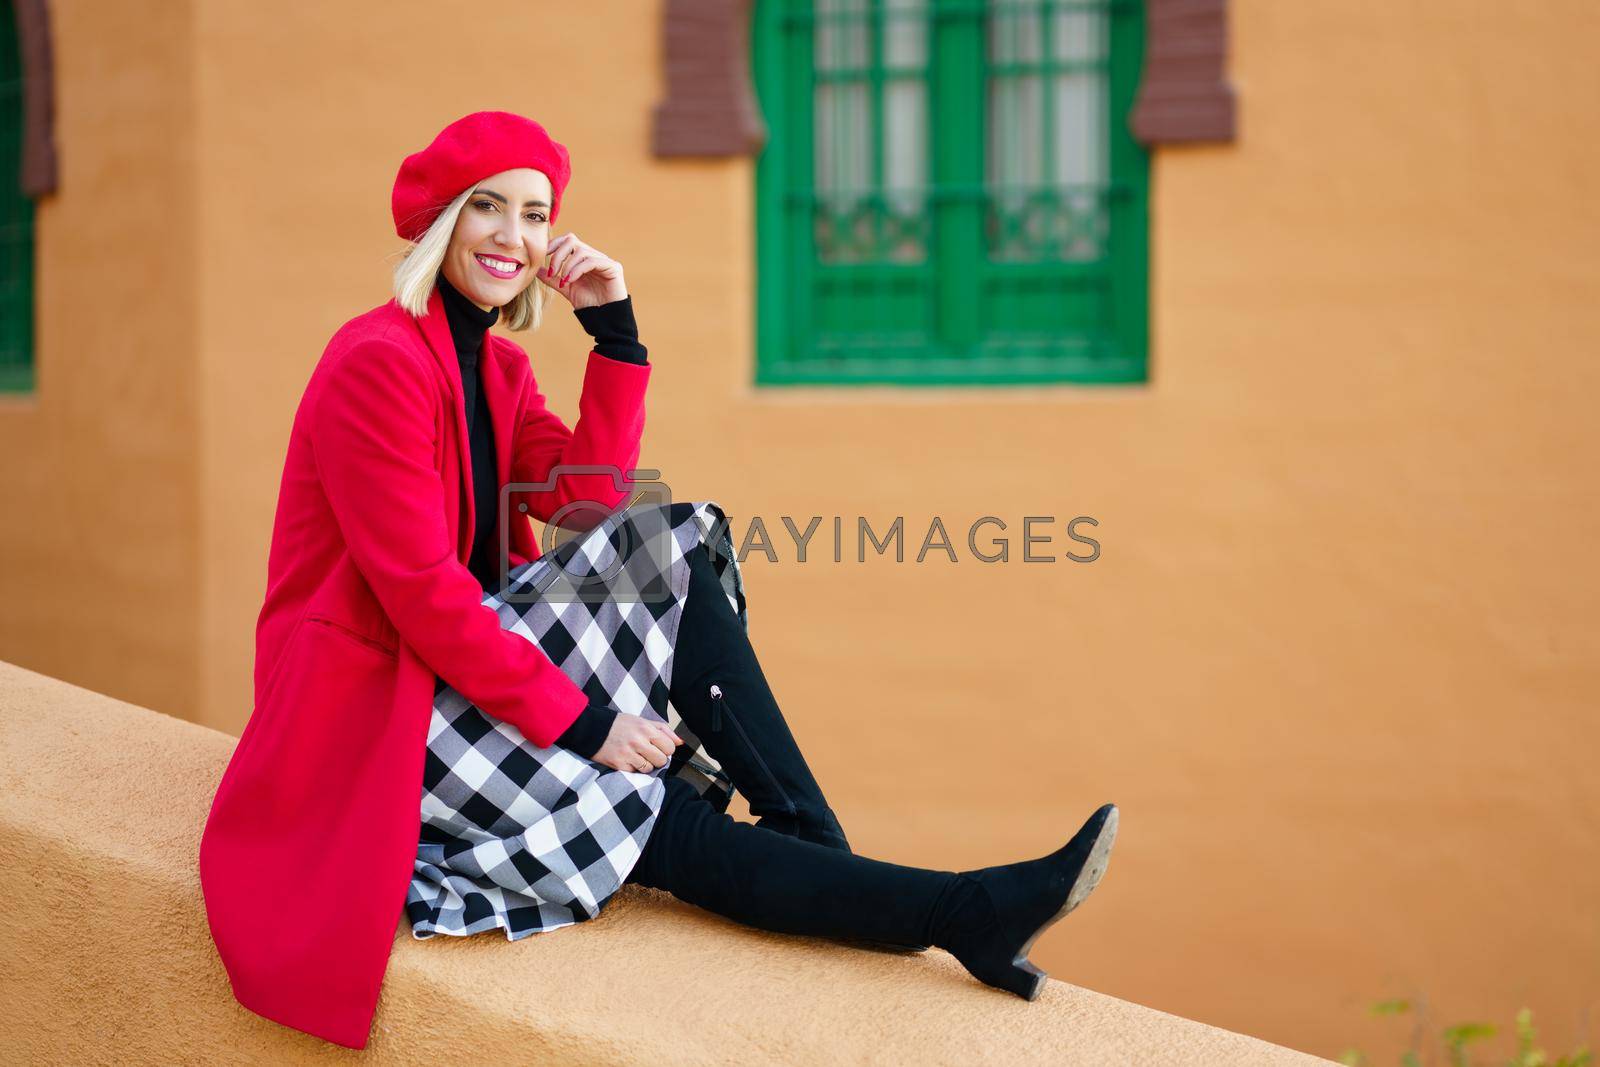 Royalty free image of Stylish happy woman sitting on border near aged colored building by javiindy